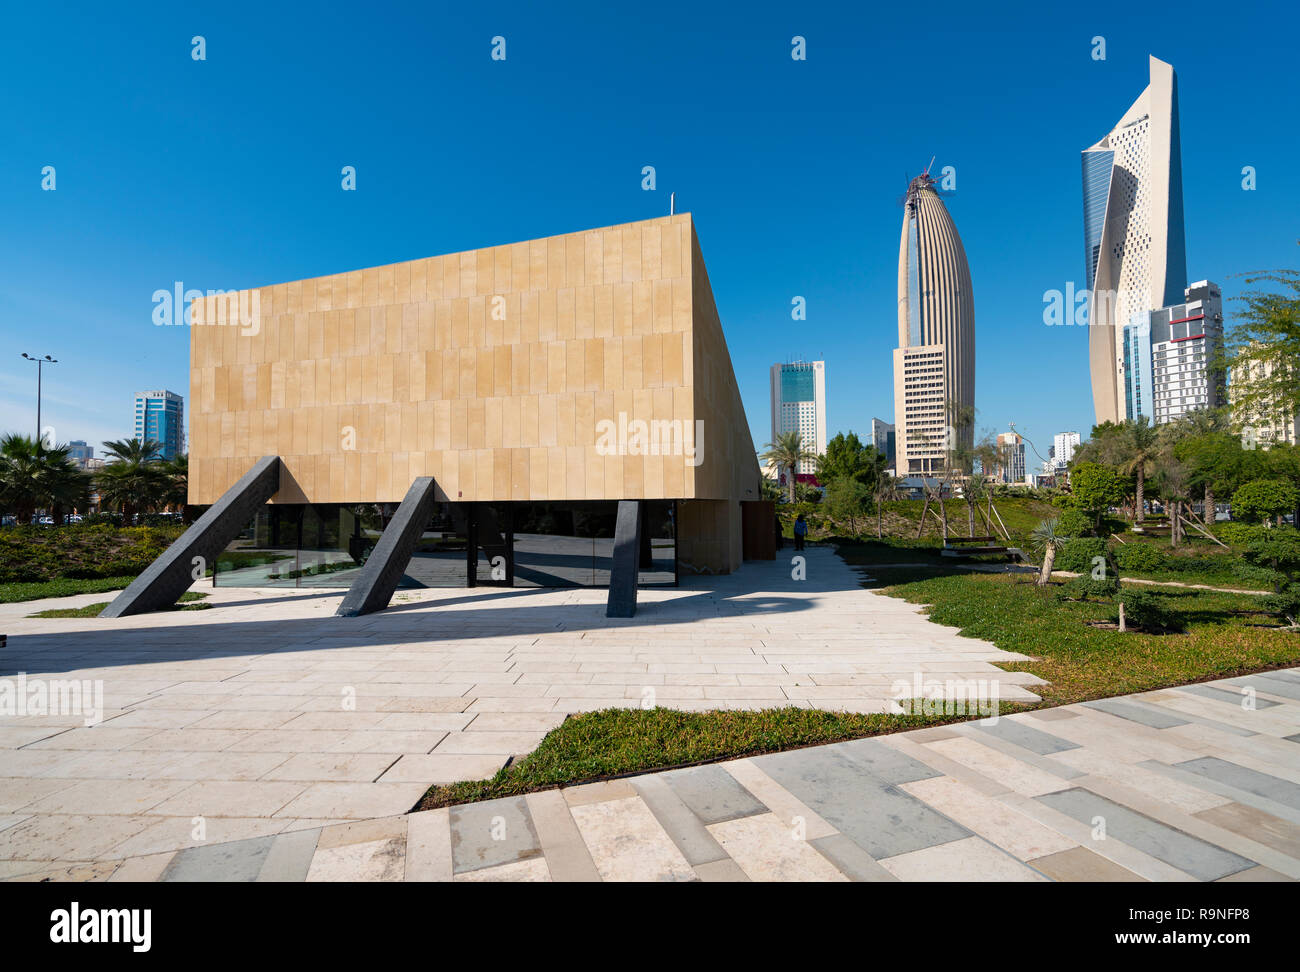 Mosque in Al Shaheed Park in Kuwait City, Kuwait,Middle East Stock Photo